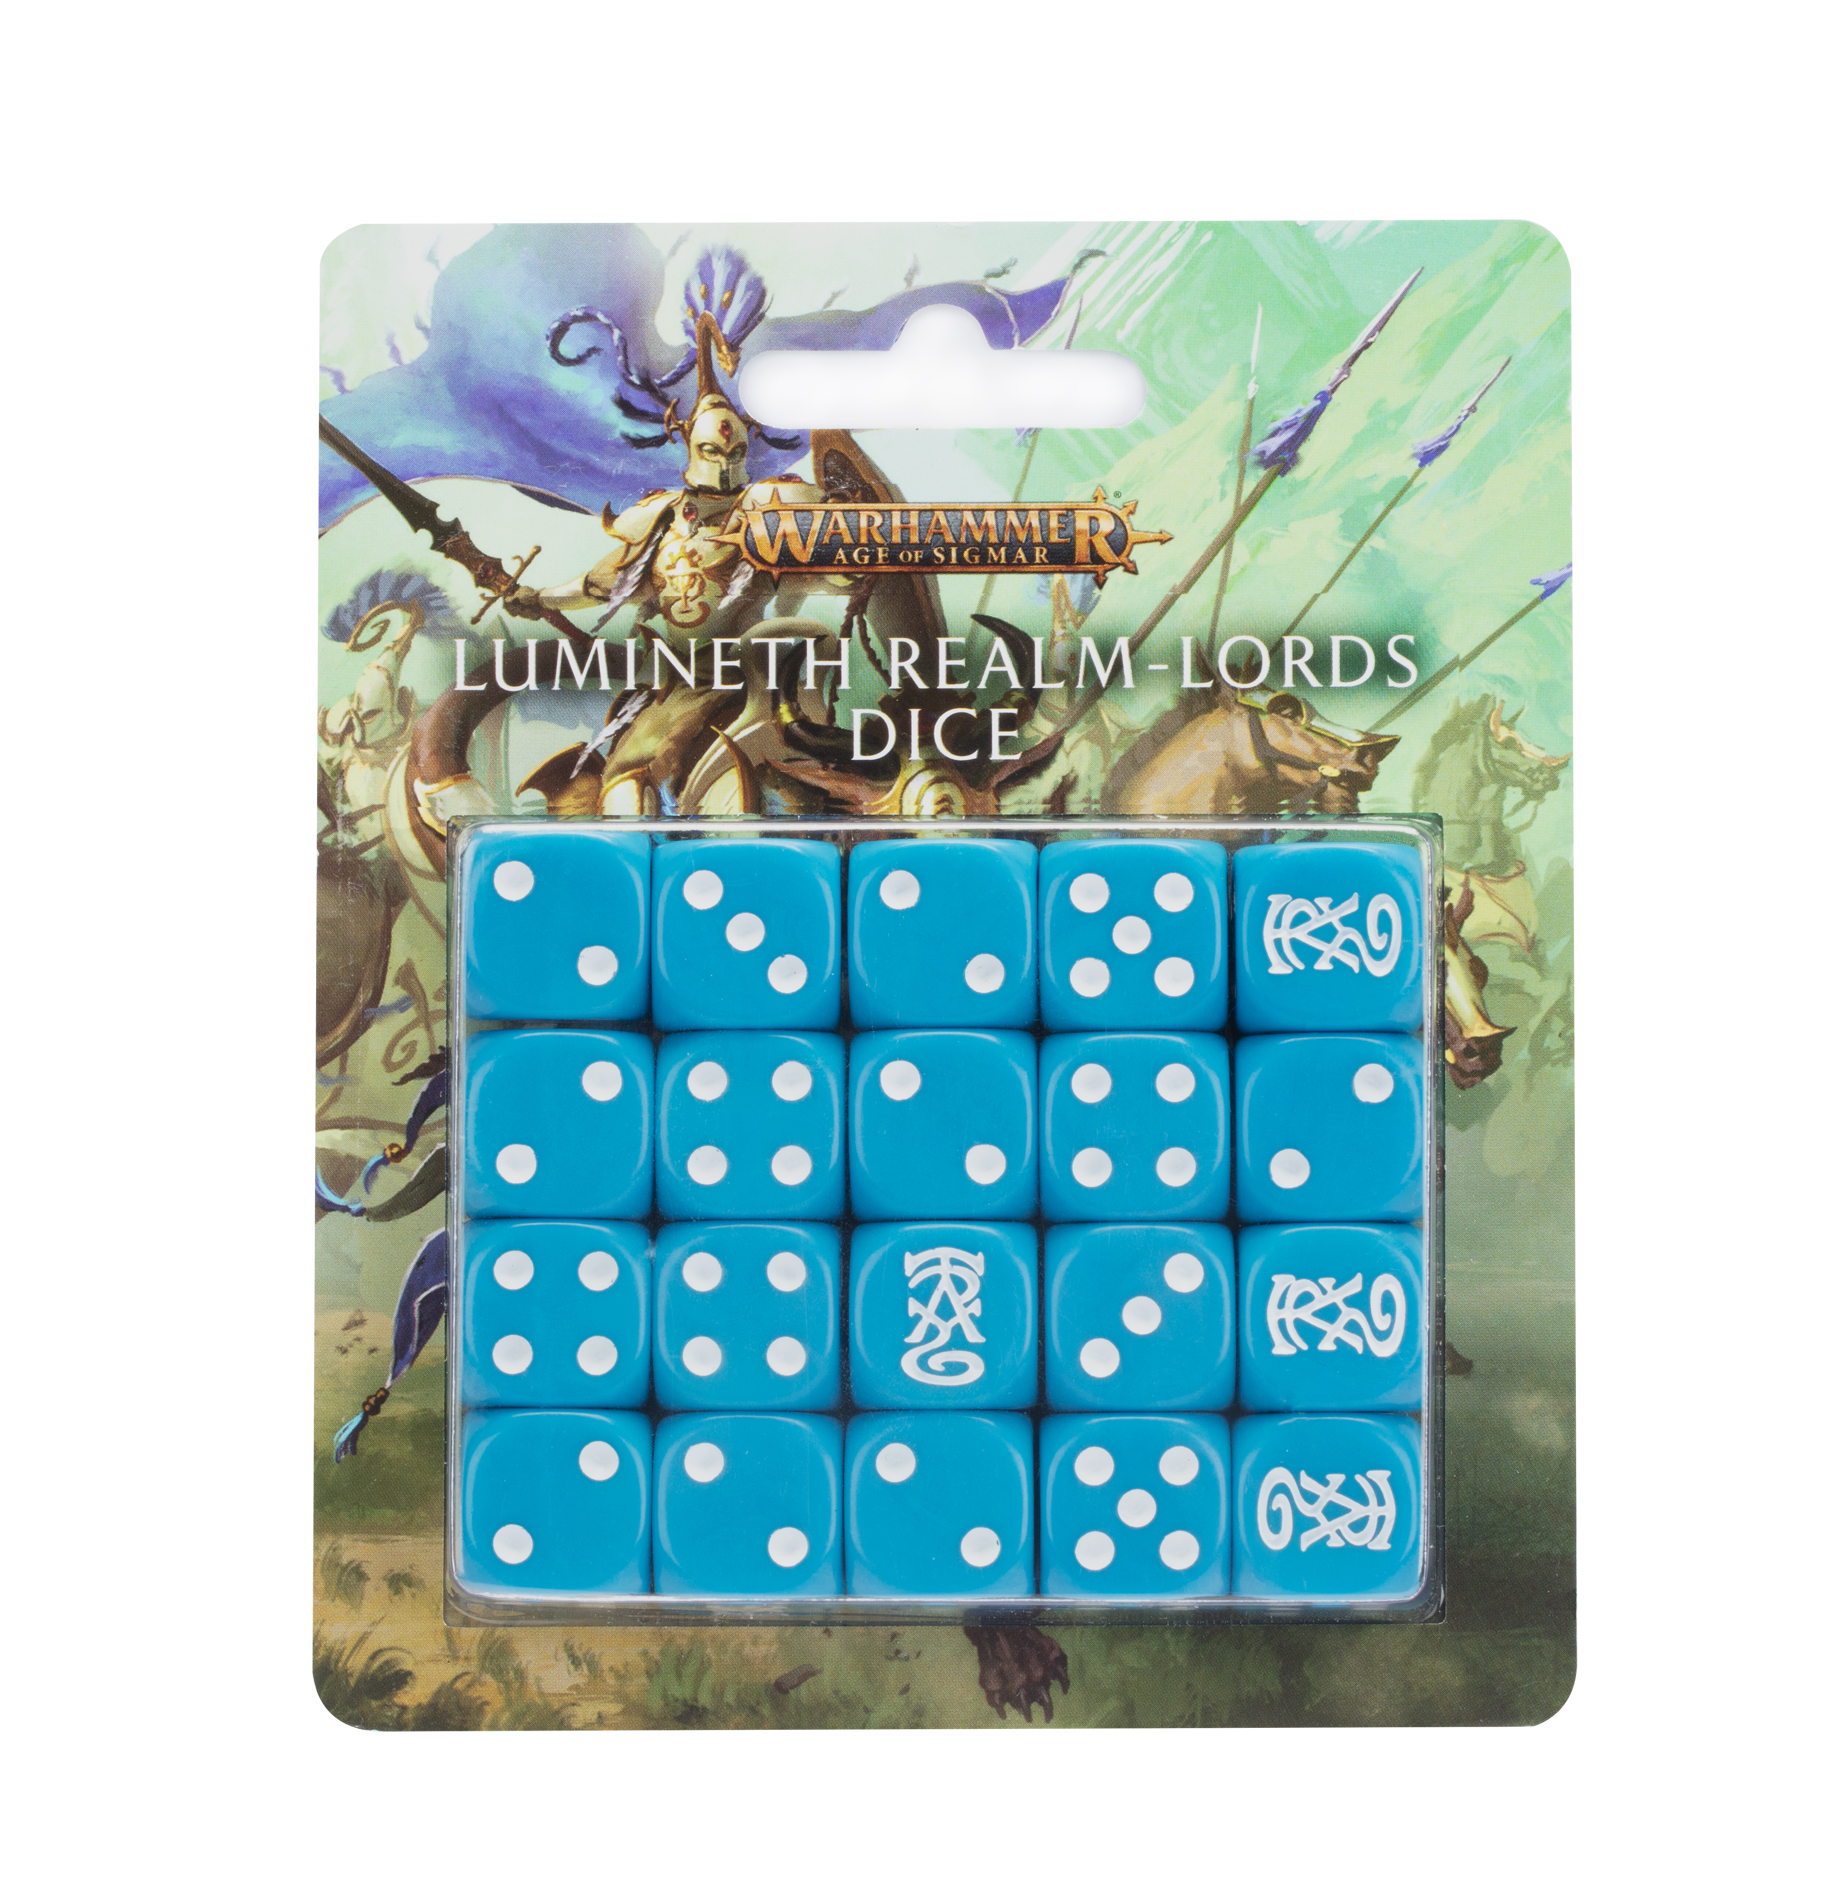 Lumineth Realm-lords Dice - 87-61 - Warhammer Age of Sigmar